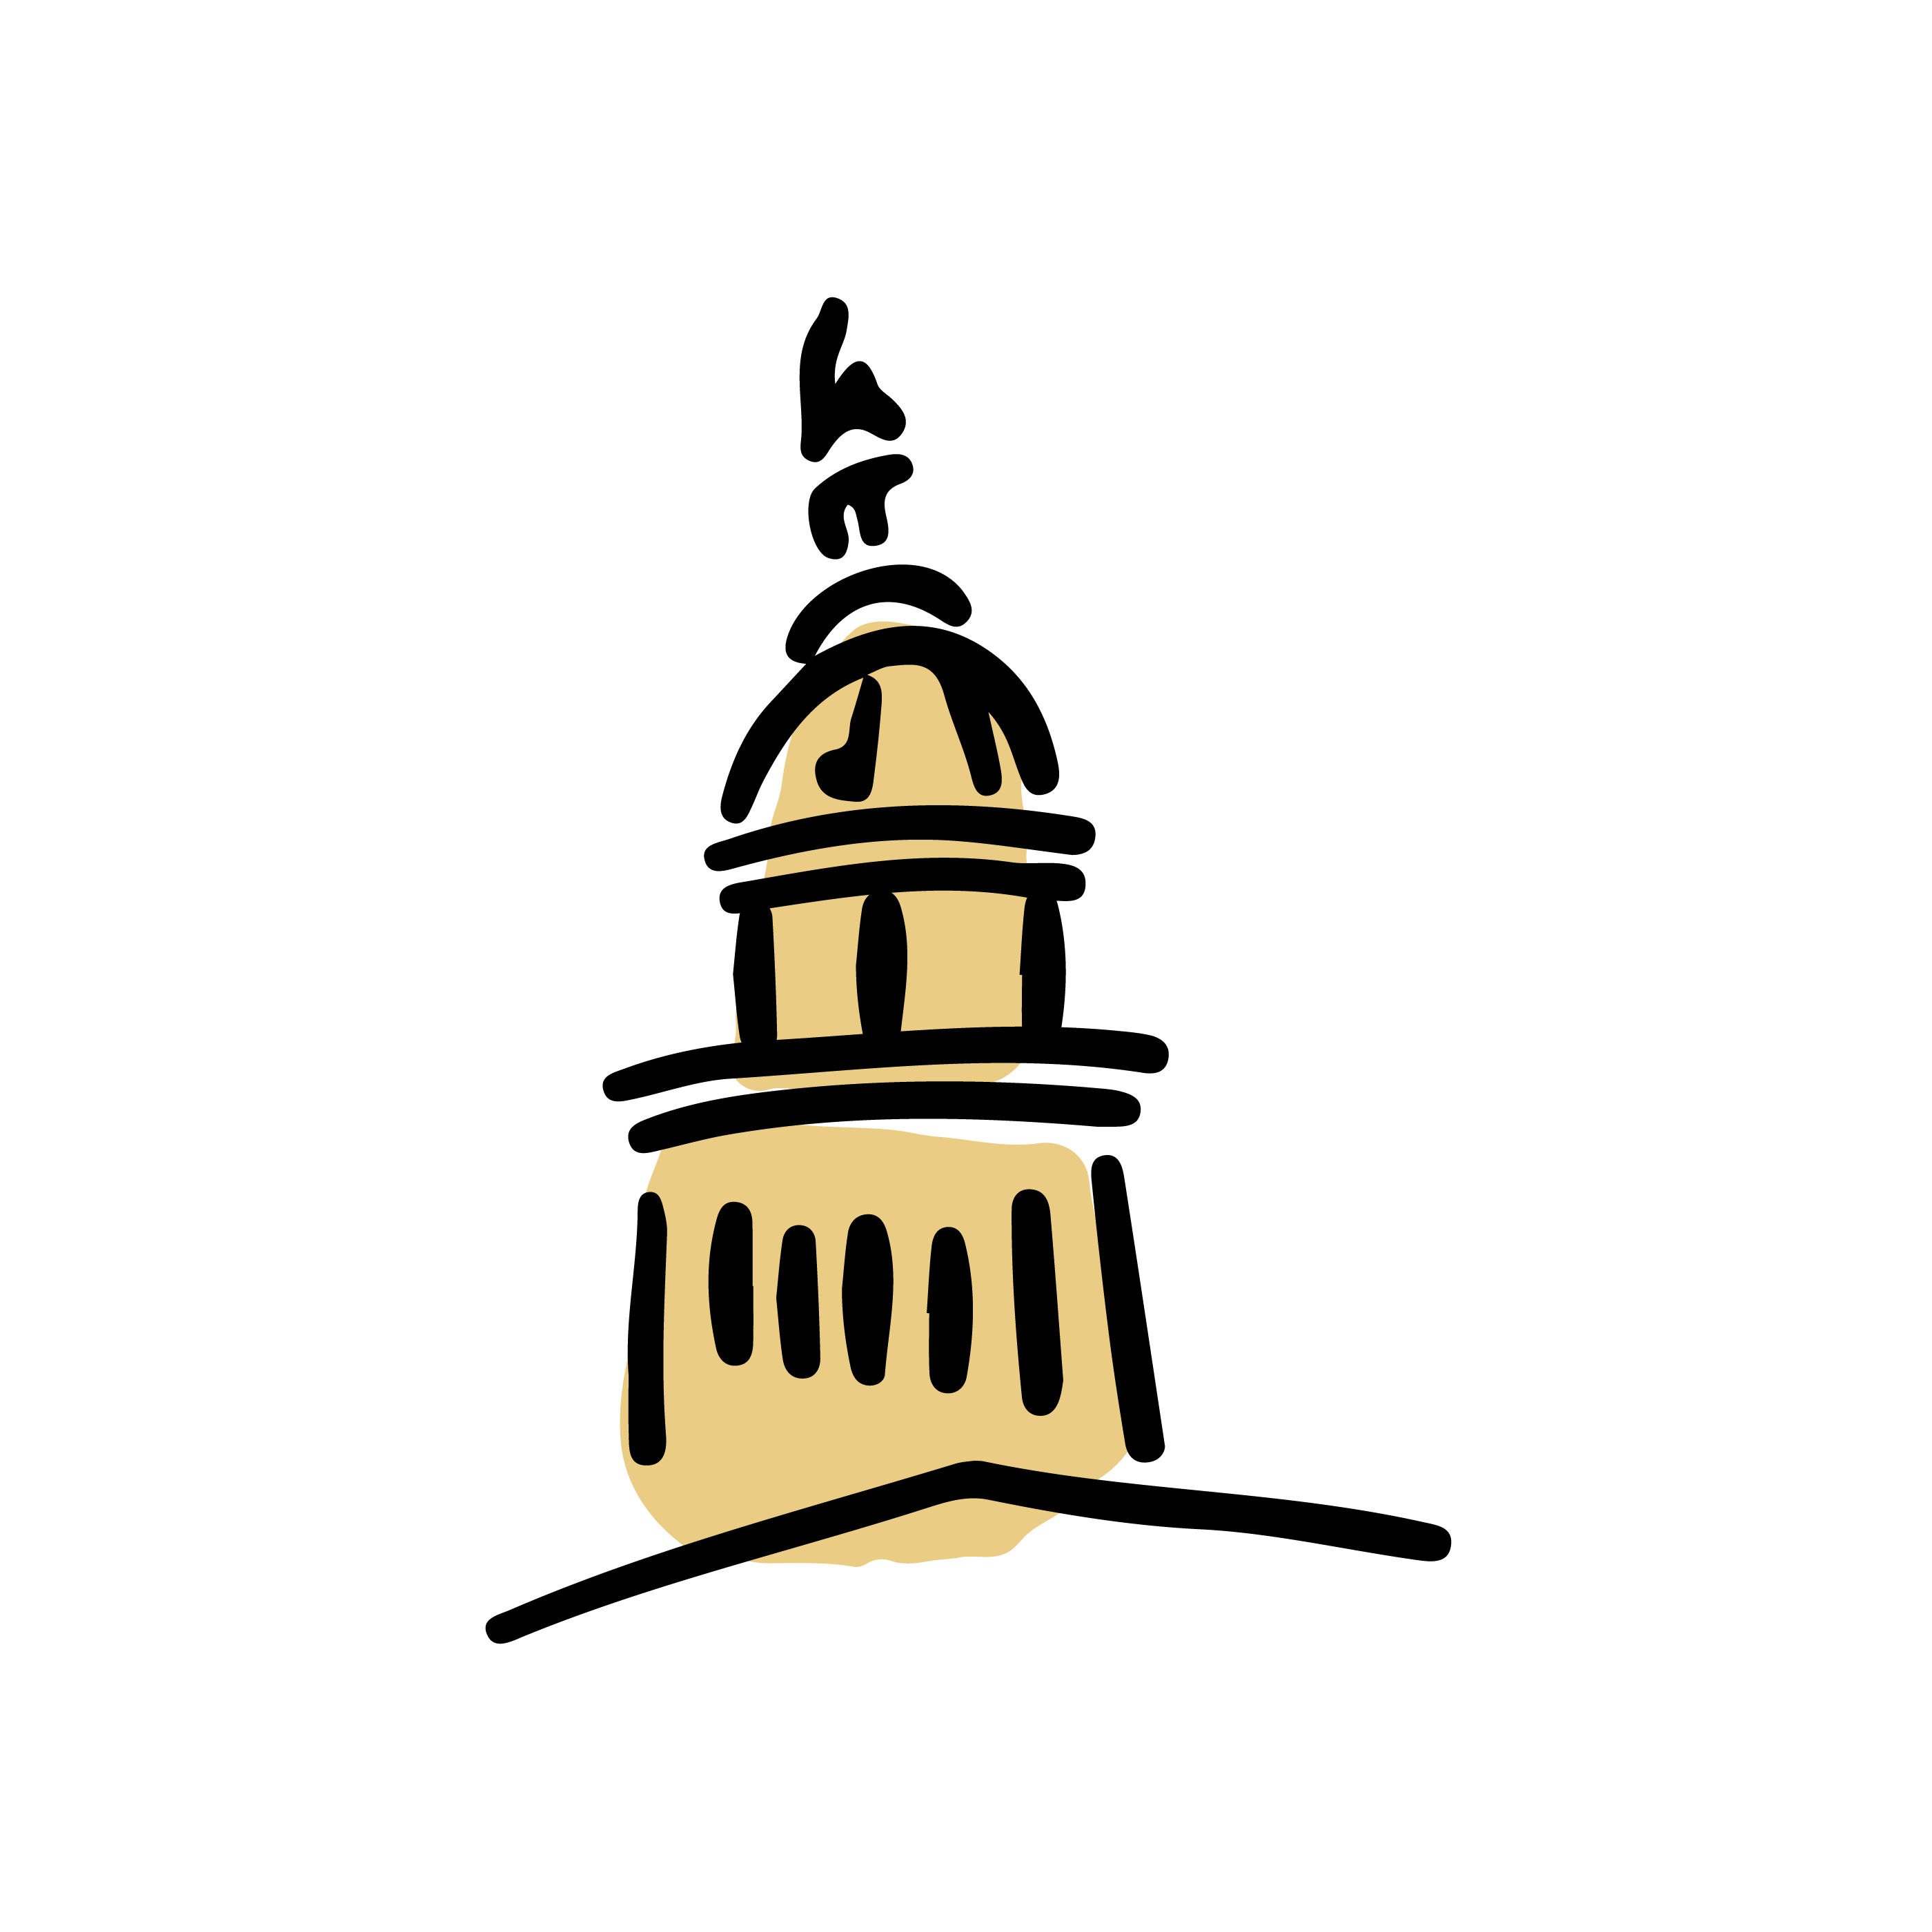 An icon illustration of the capital building.